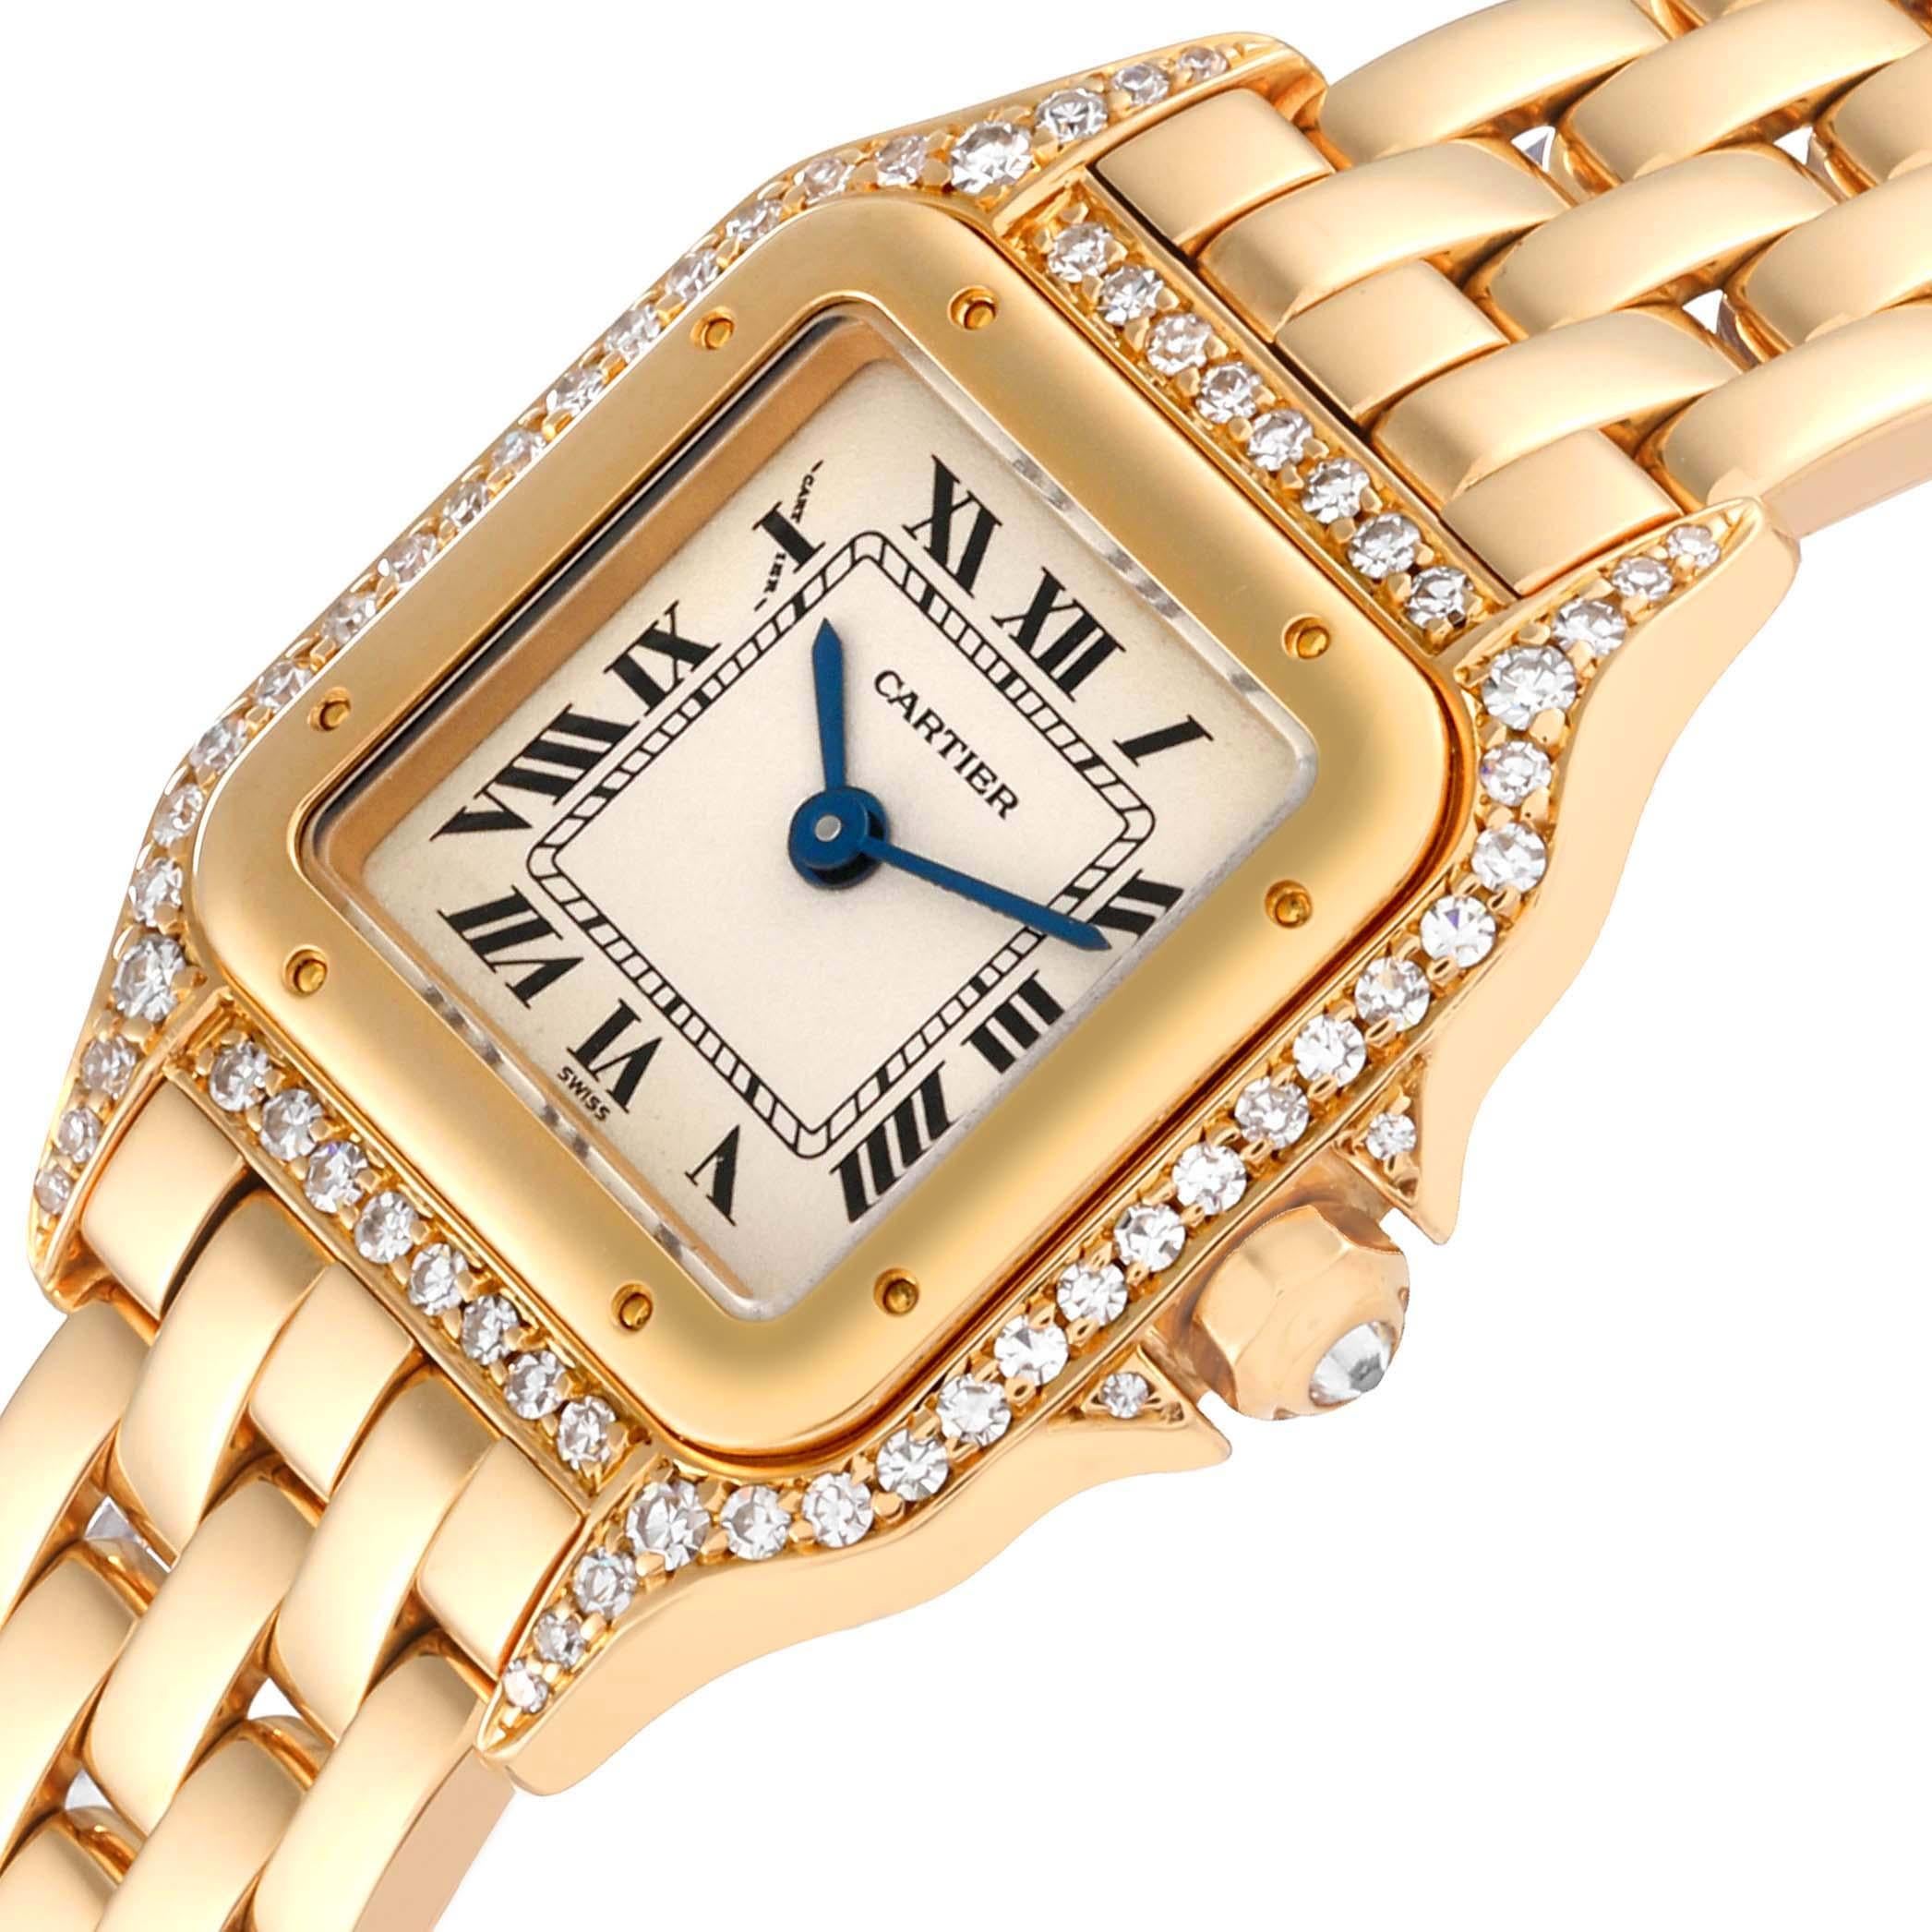 Cartier Panthere Small Yellow Gold Diamond Ladies Watch 17439 2